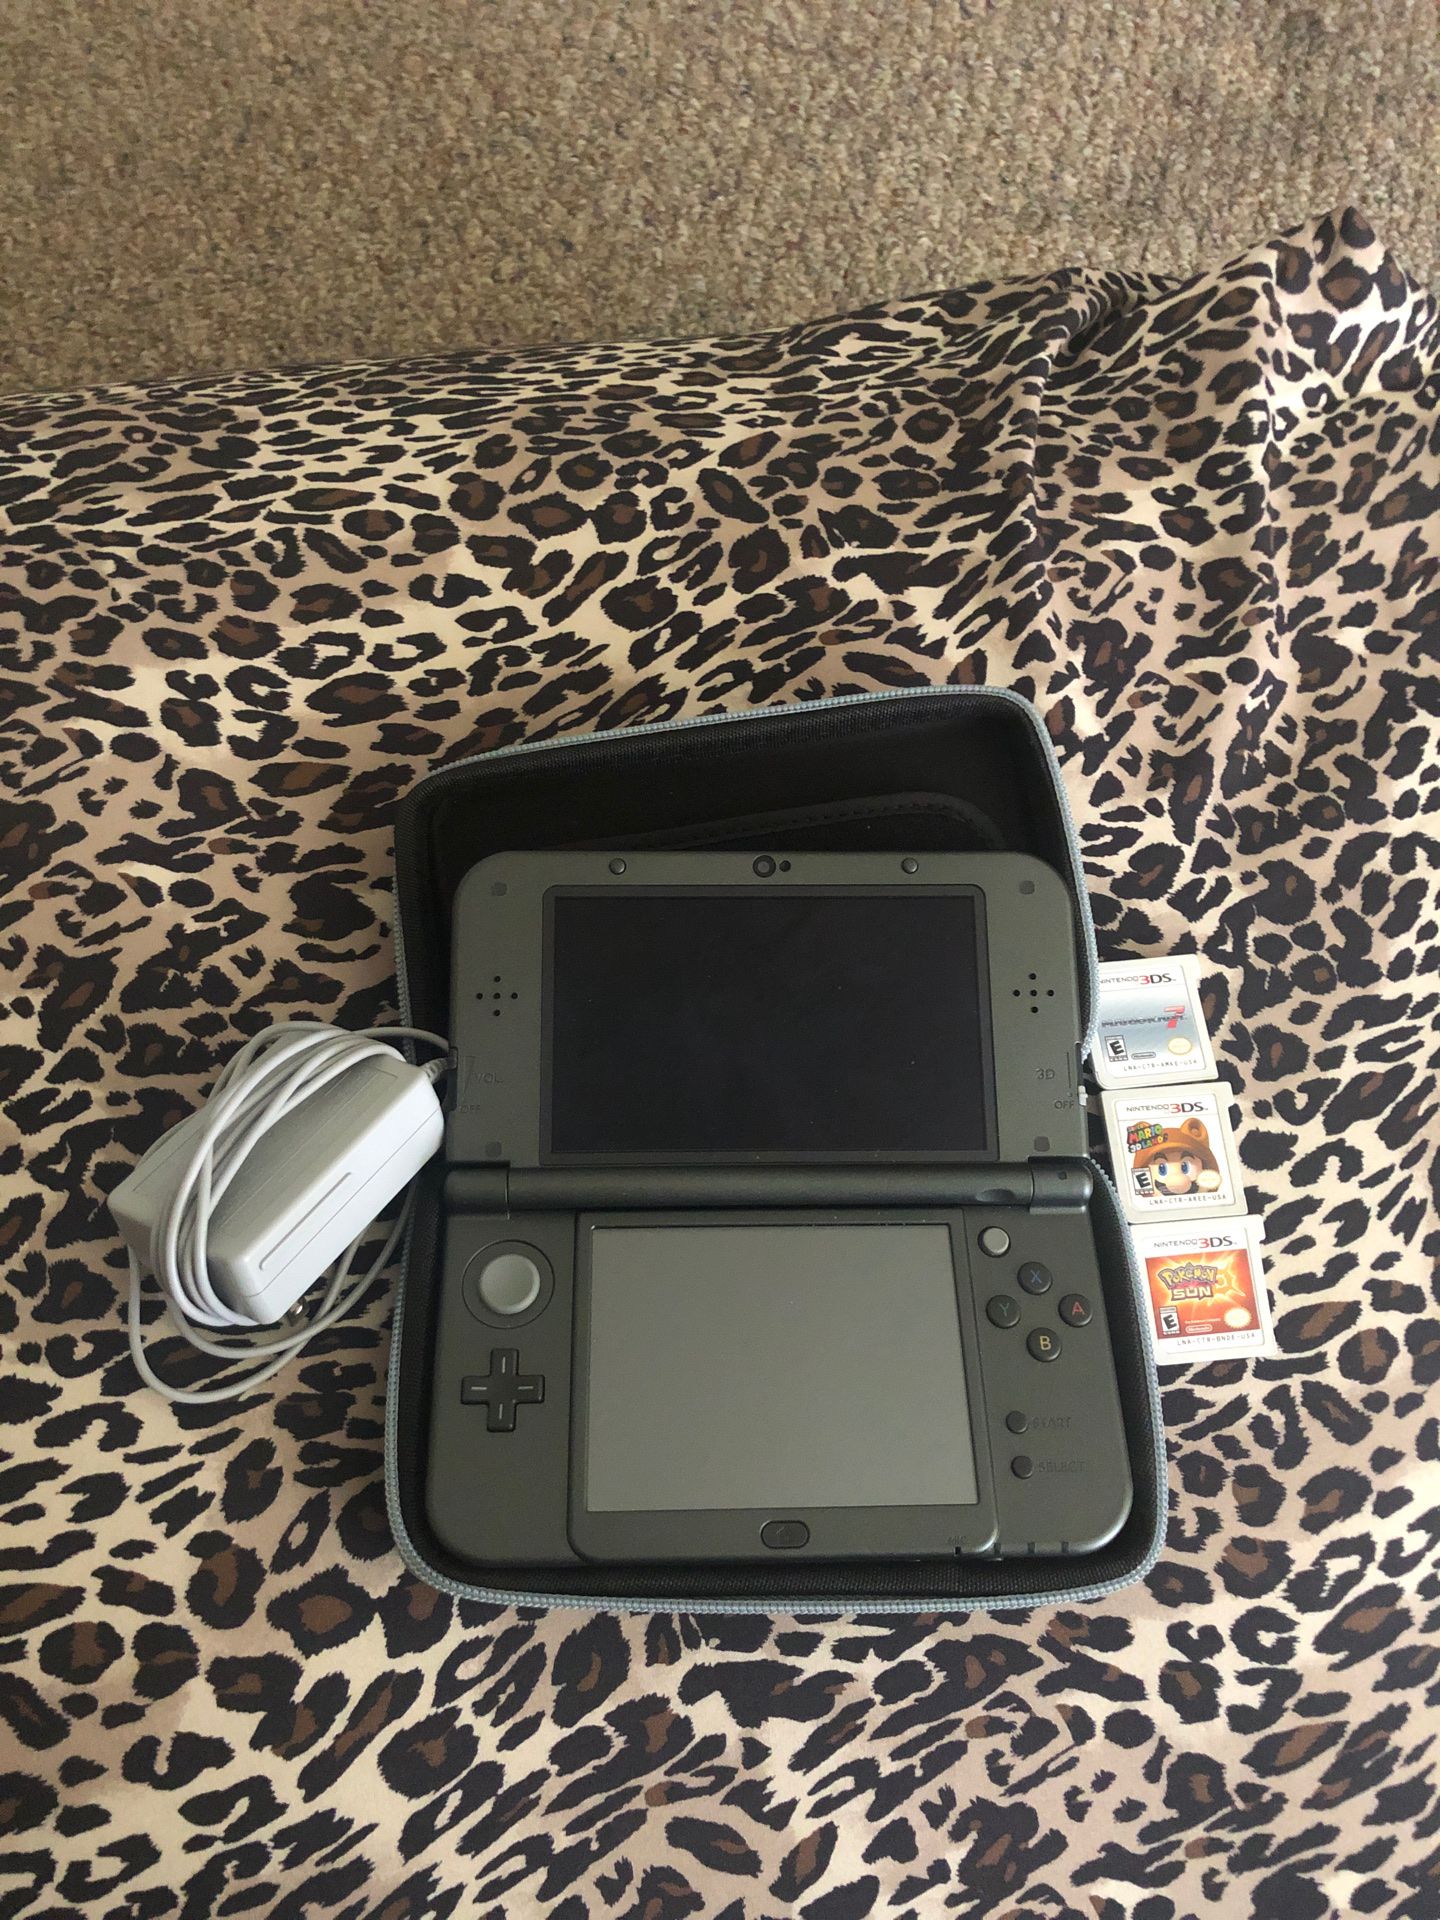 Nintendo 3DS with 3 games